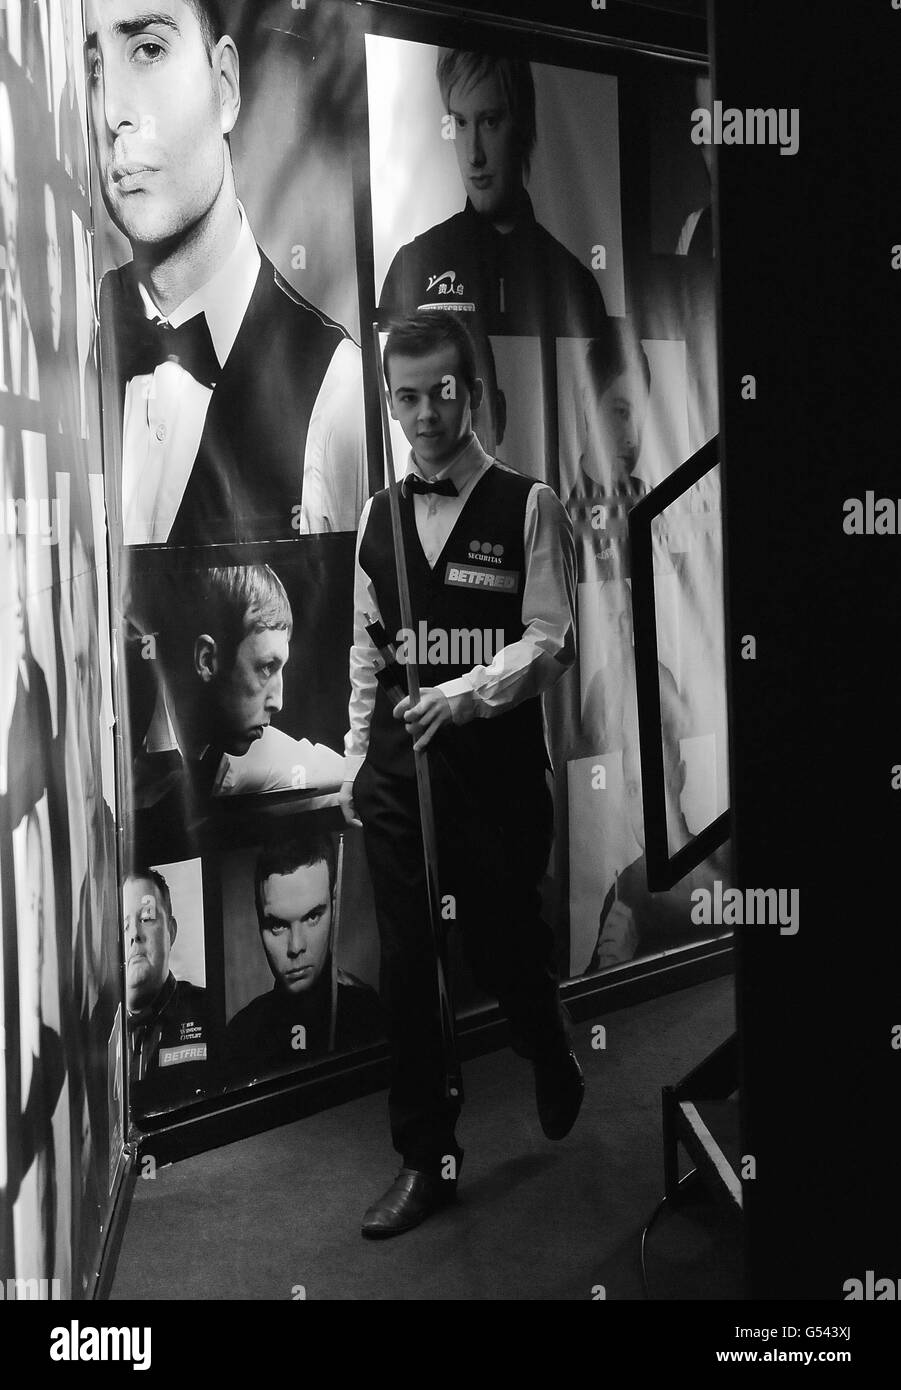 PICTURE CONVERTED TO BLACK AND WHITE Belgium's Luca Brecel enters the arena ahead of his first round match during the Betfred.com World Snooker Championships at the Crucible Theatre, Sheffield. Stock Photo